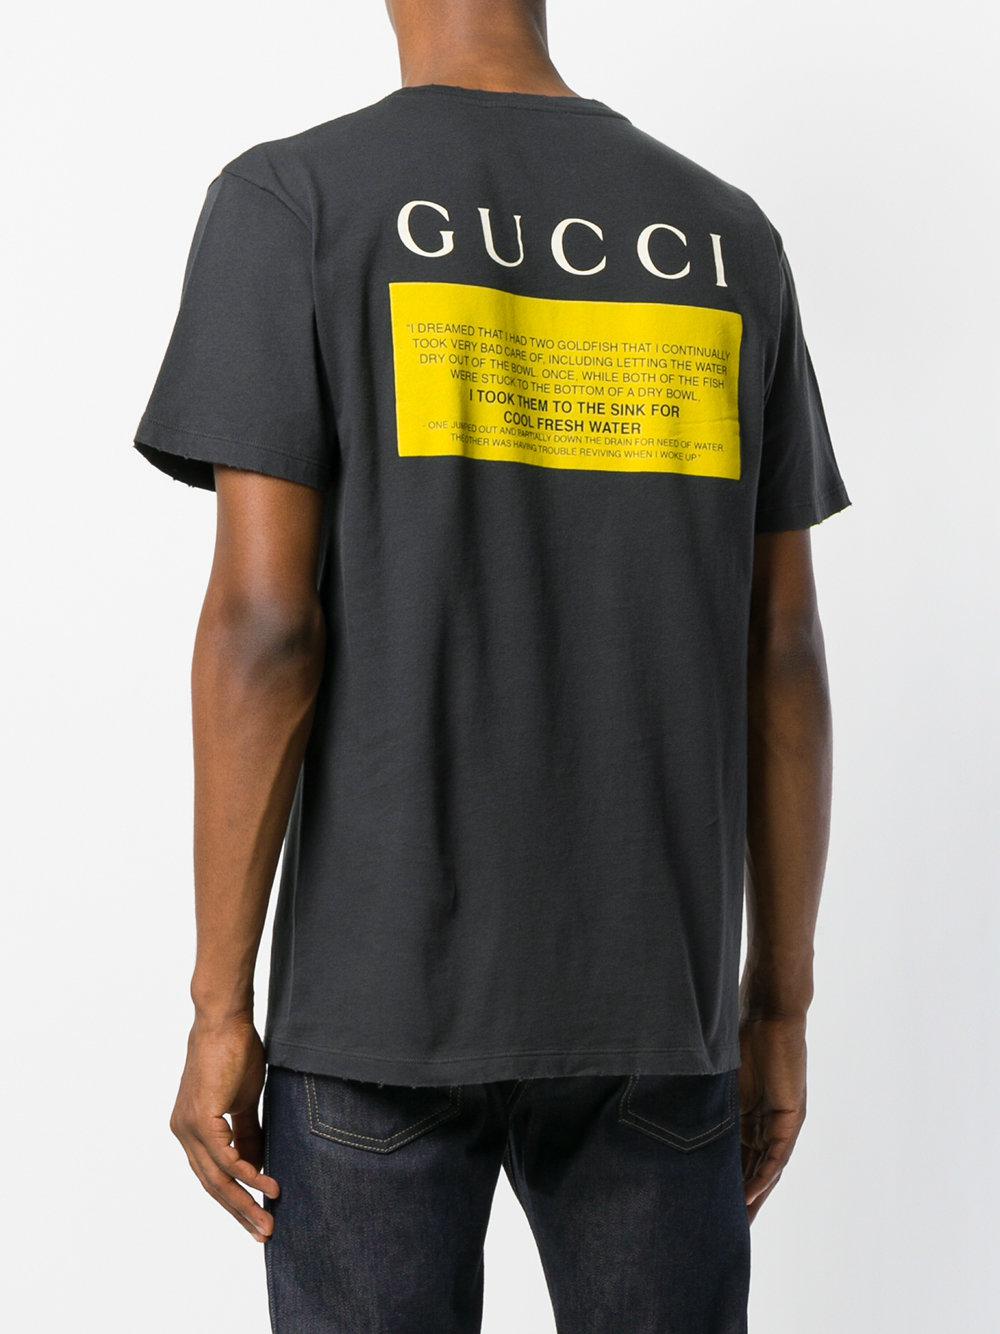 Gucci Black Cat Printed T-shirt in Gray for Men - Lyst